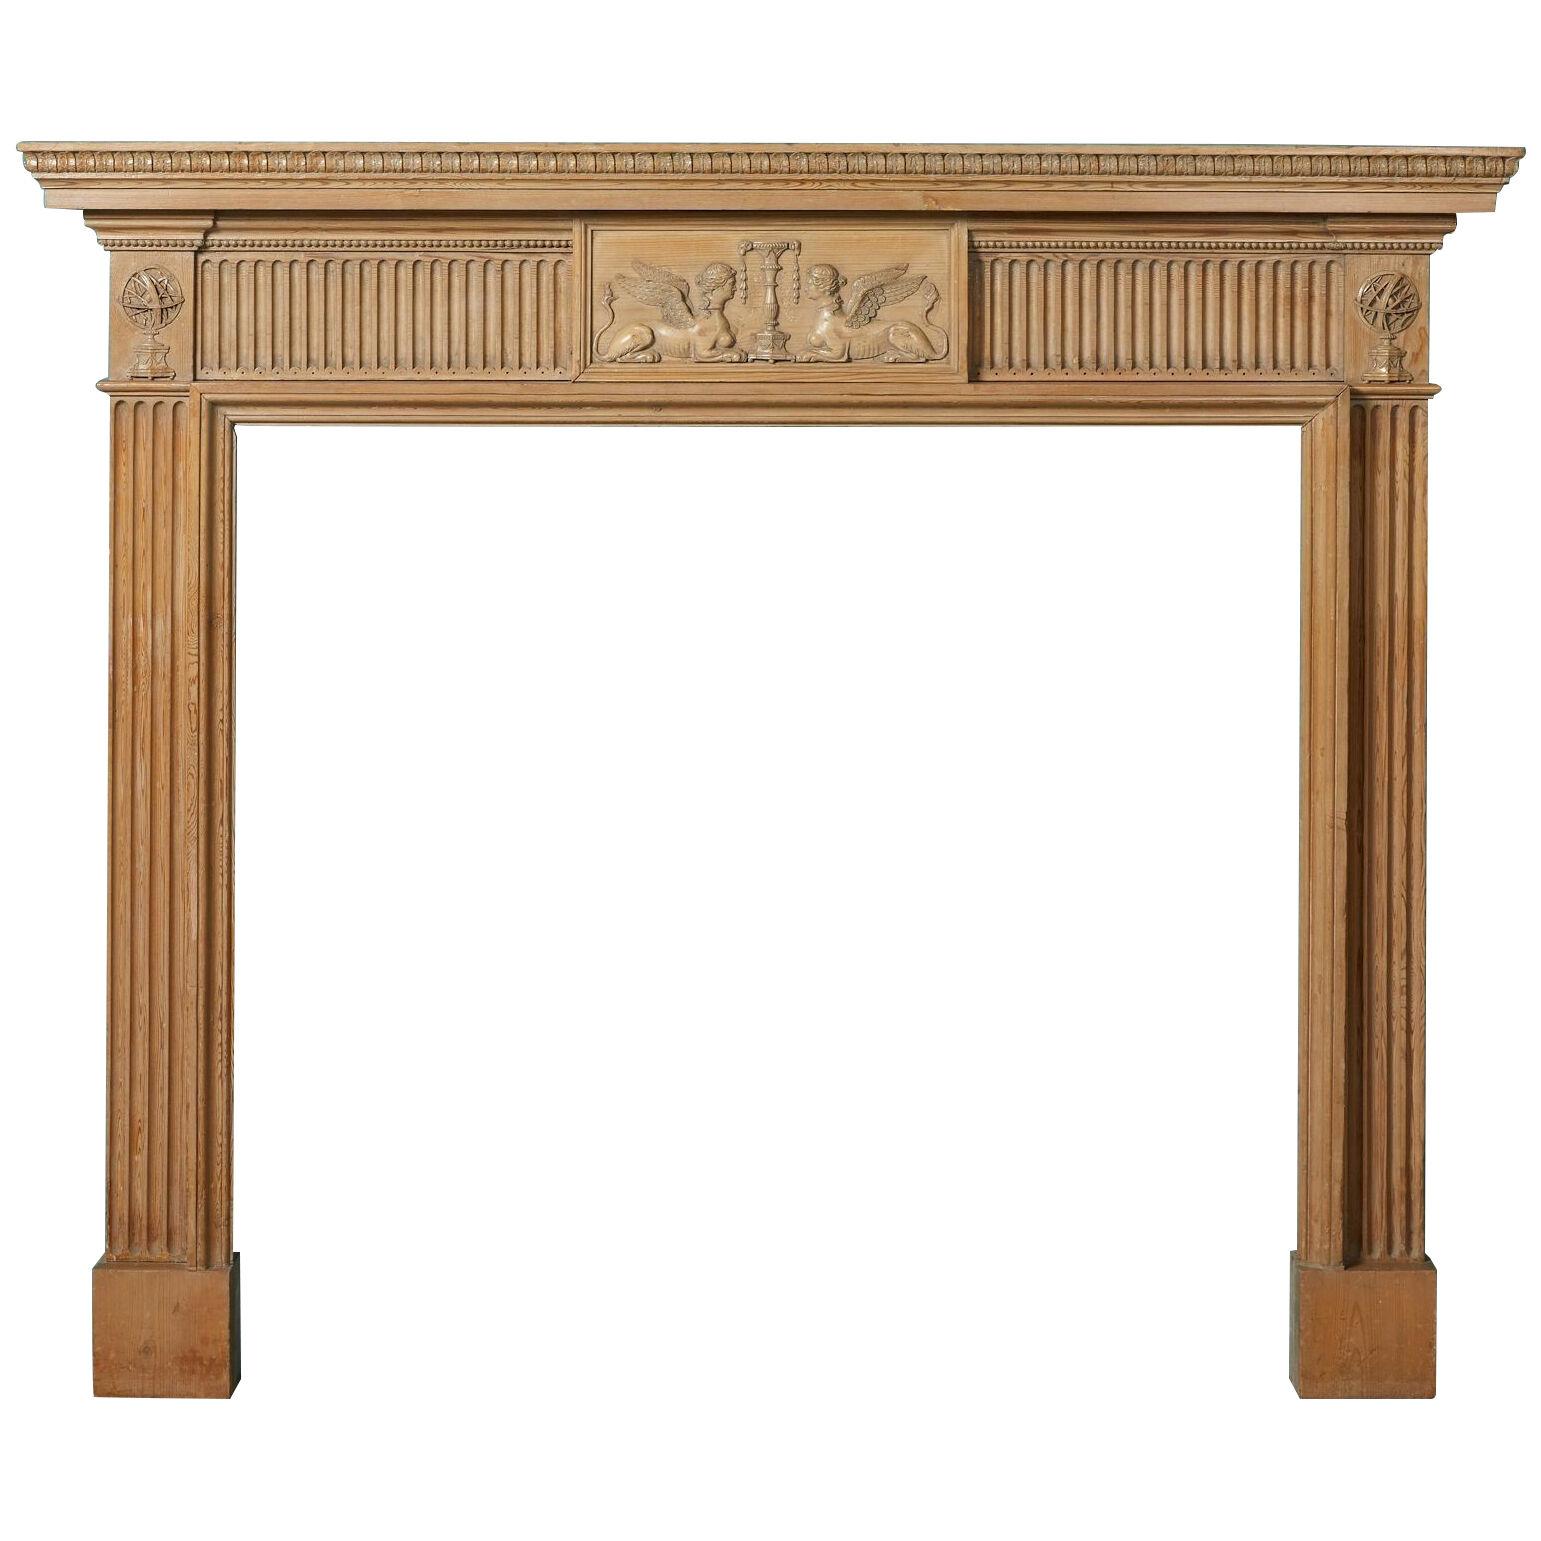 Antique English Neoclassical Style Fireplace